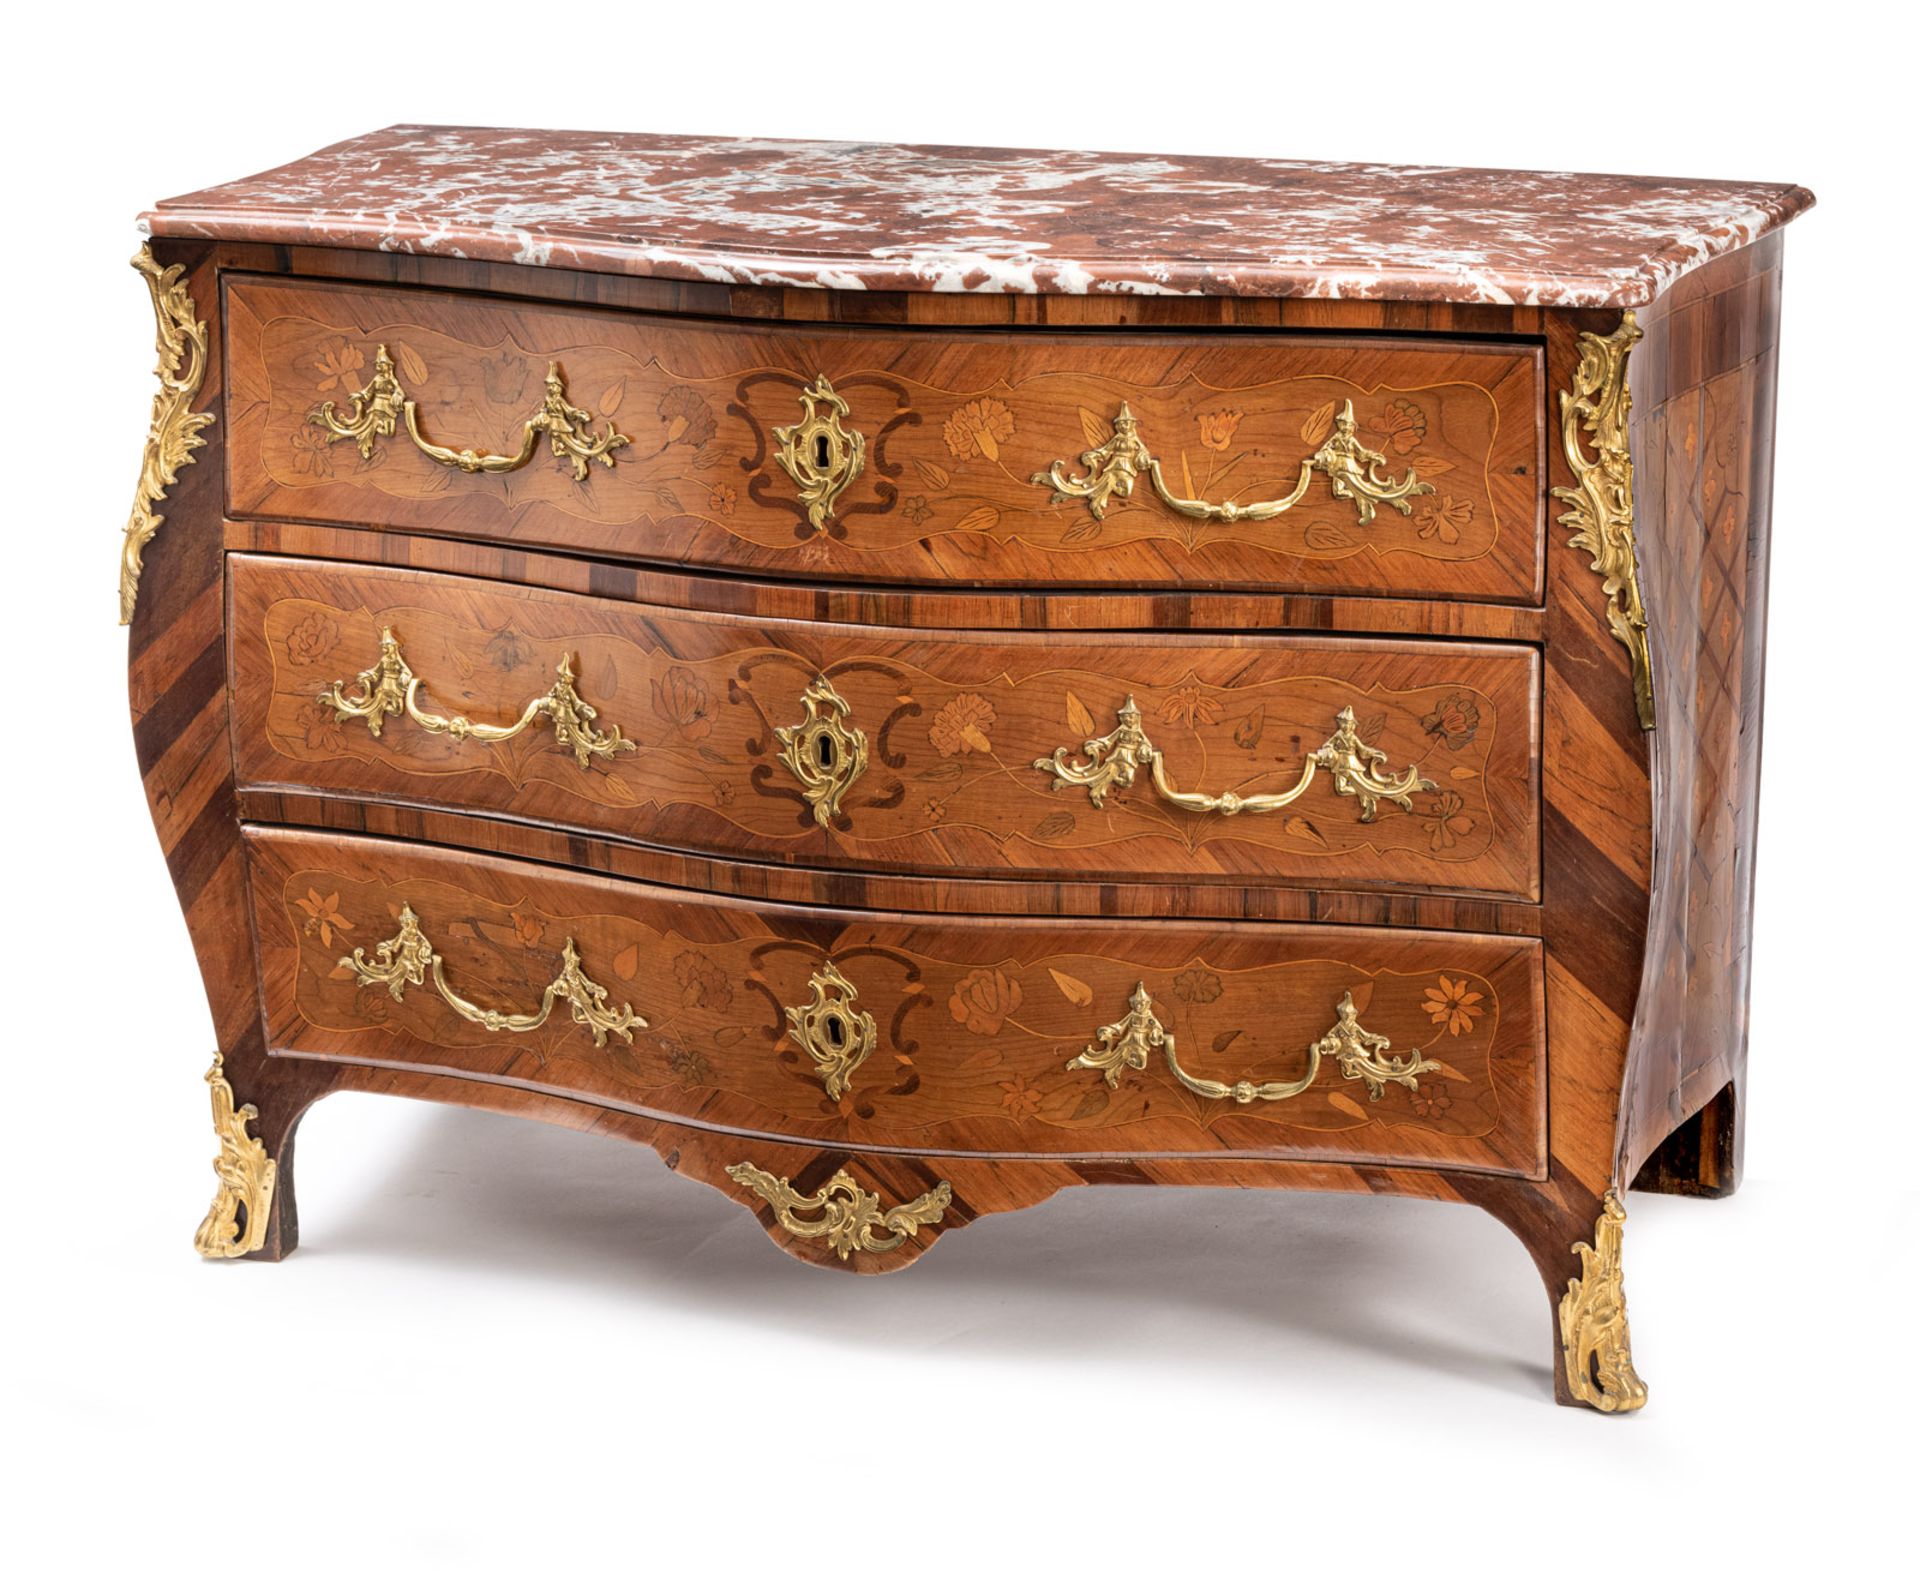 A FINE LOUIS XV BRONZE MOUNTED MAHOGANY, KING WOOD AND OTHERS COMMODE